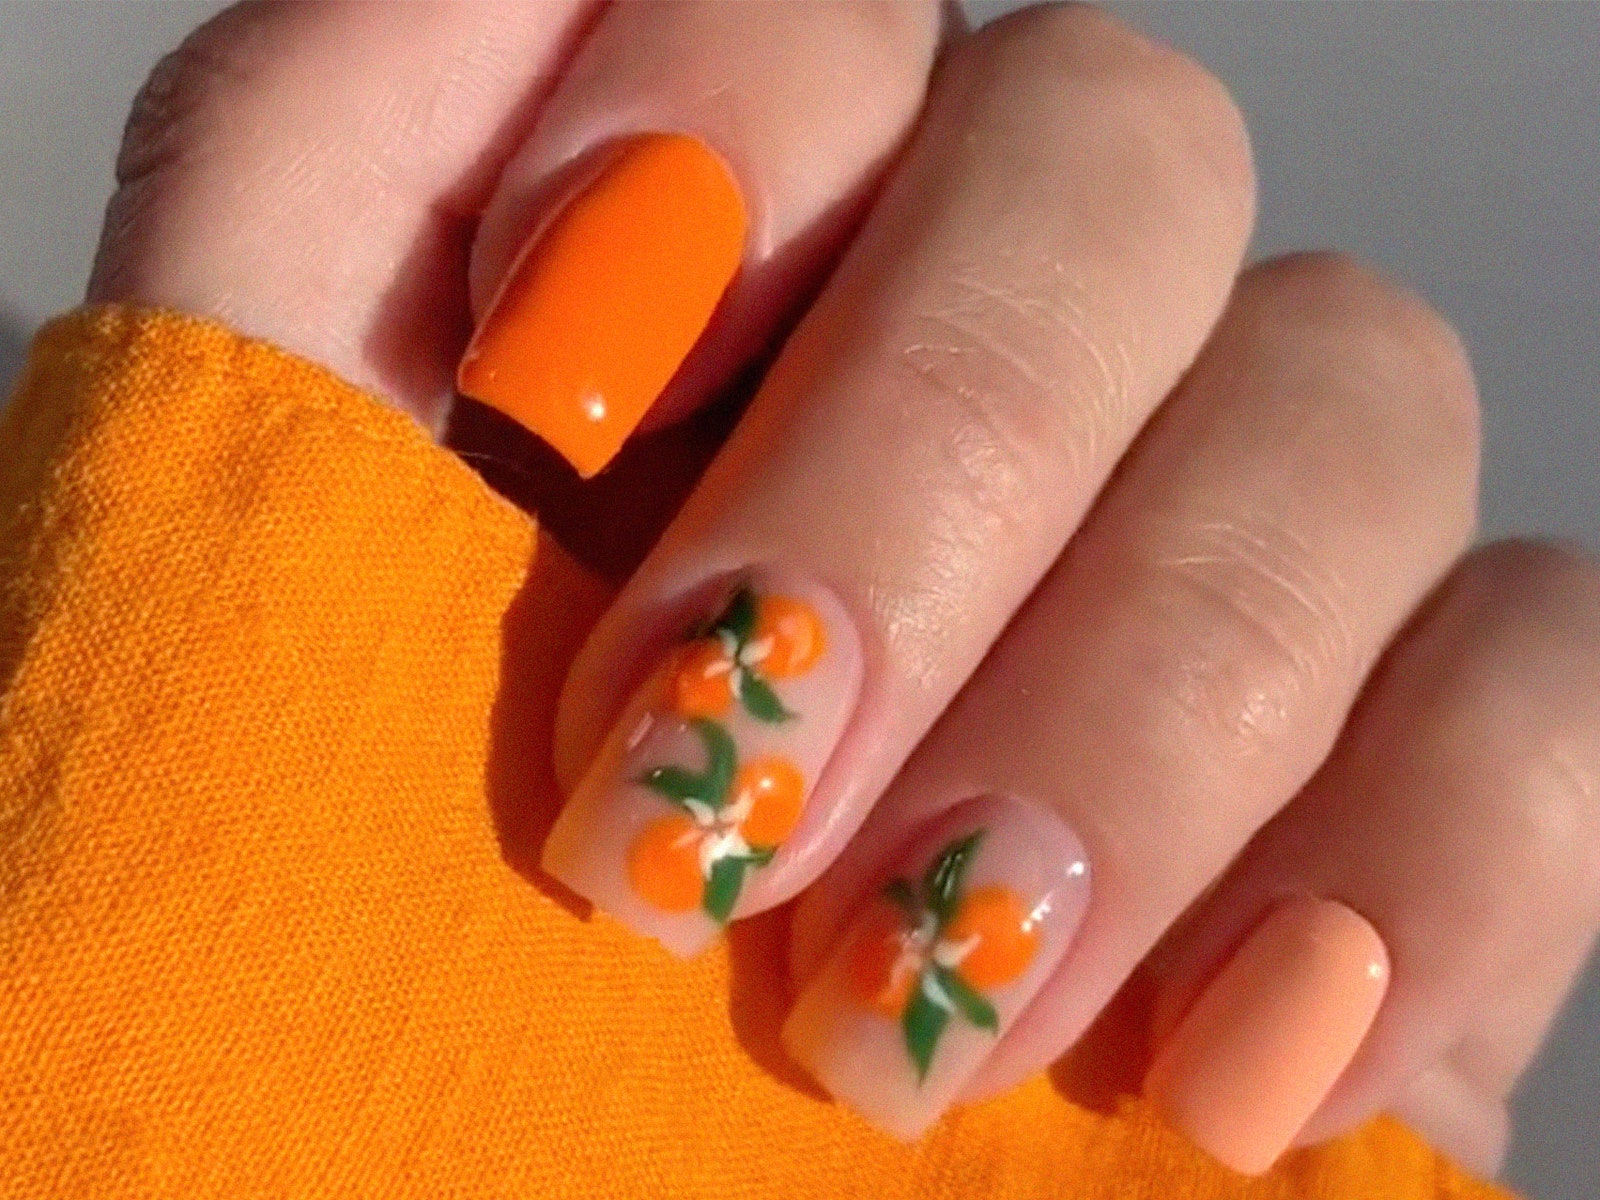 Citrus nails is the fresh manicure trending in the heatwave